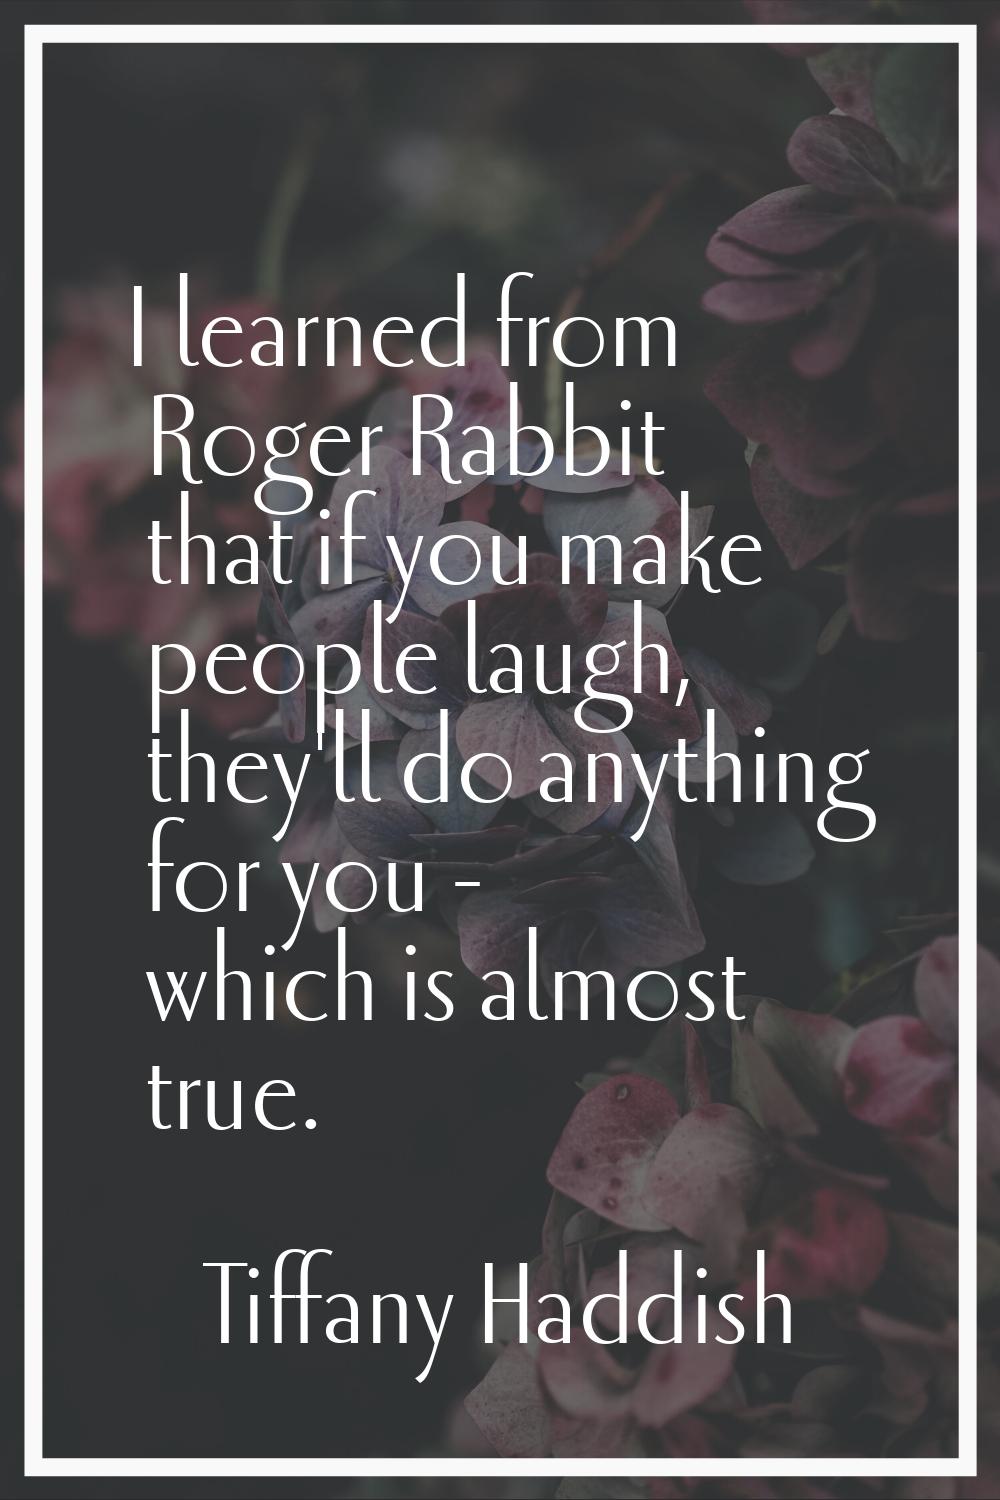 I learned from Roger Rabbit that if you make people laugh, they'll do anything for you - which is a